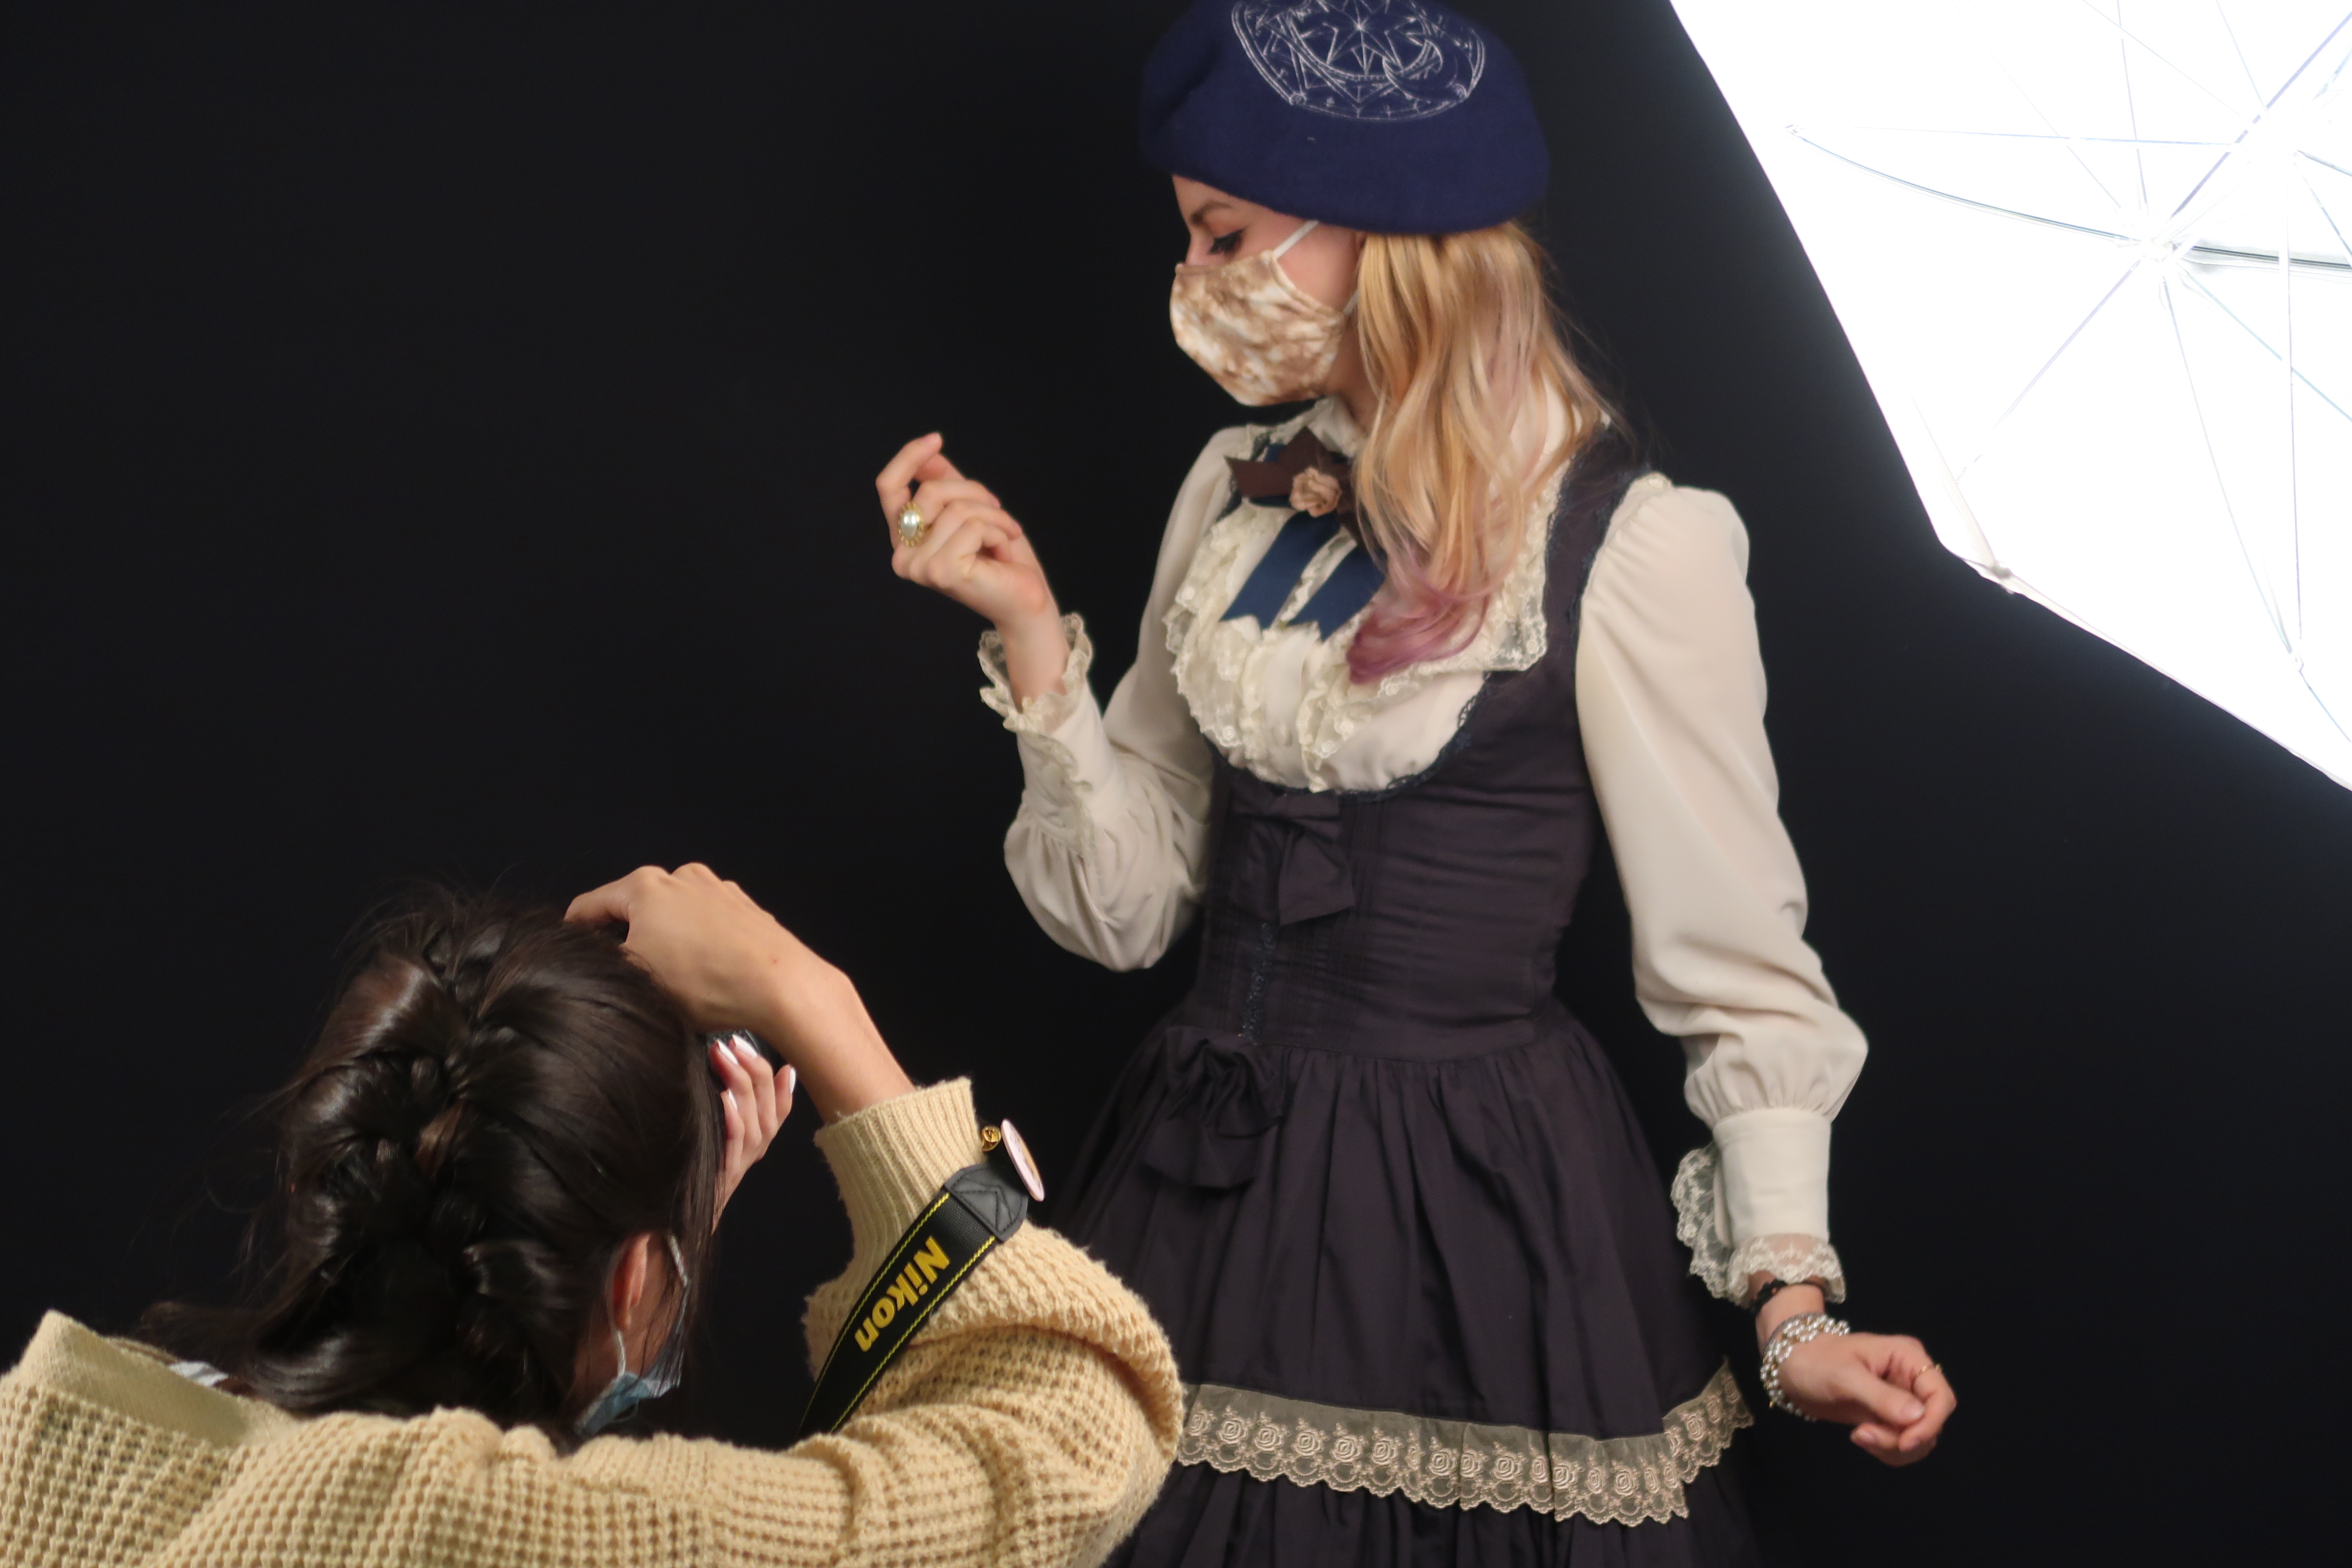 Student in braid taking photo of a student posing with hand to face and wearing a white ruffle blouse and black cinched dress.